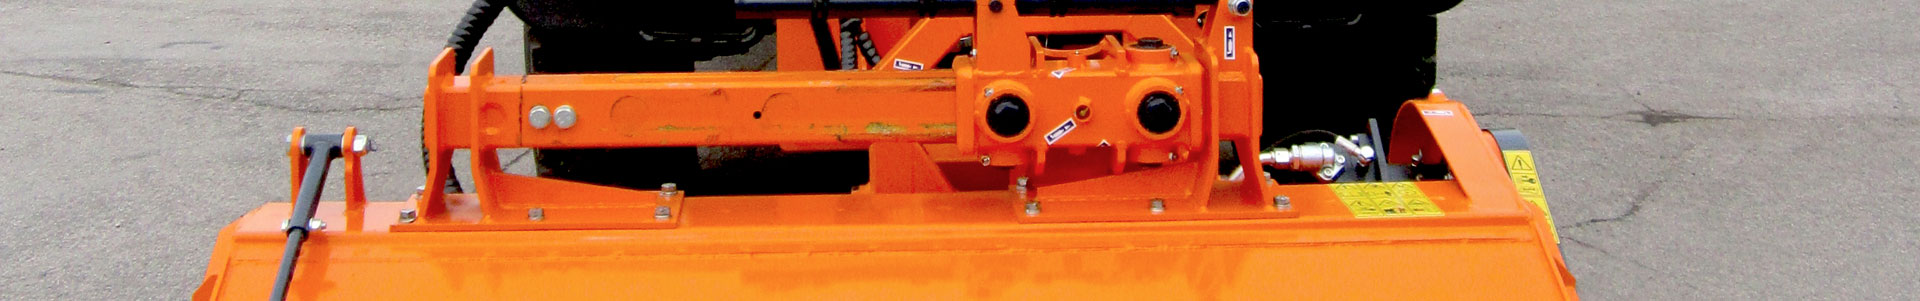 Hymach Brushcutters for truck